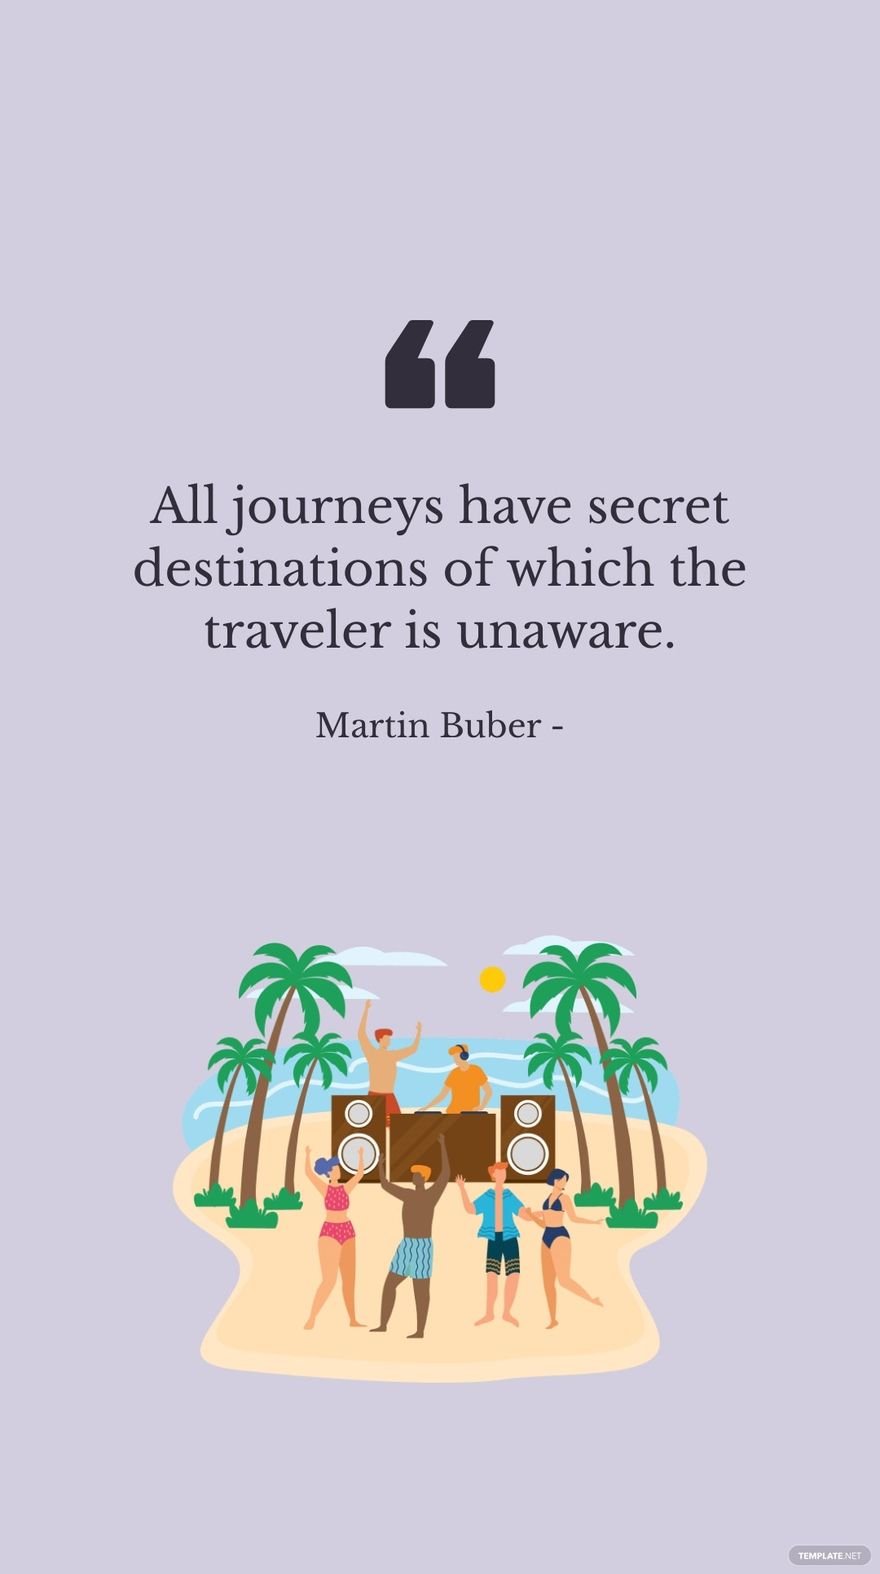 Martin Buber - All journeys have secret destinations of which the traveler is unaware.